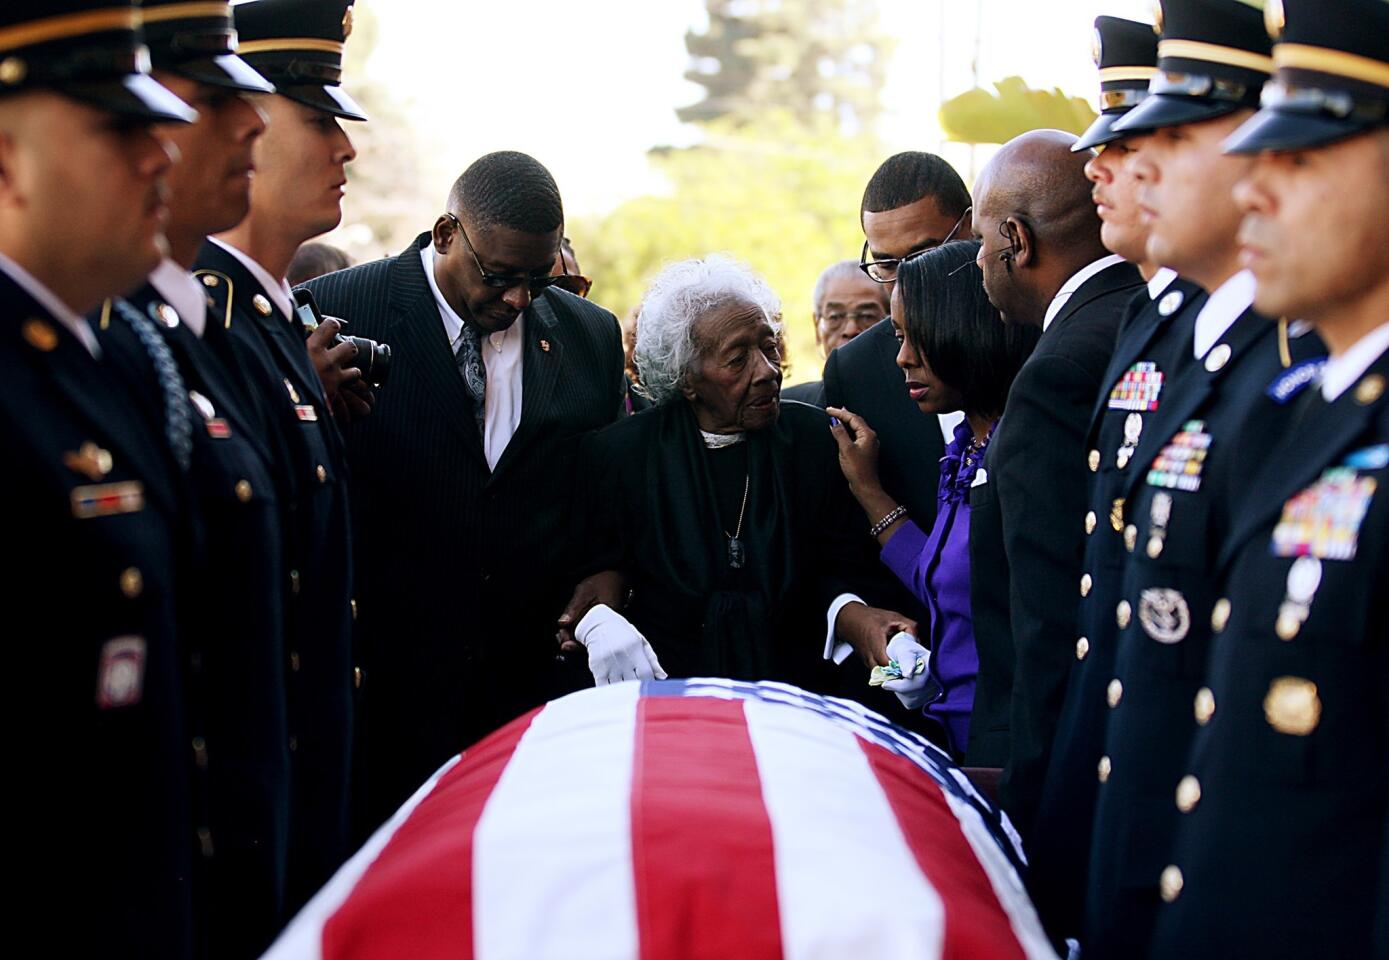 Clara Gantt, 94, arrives for the funeral service for her husband, Army 1st Class Sgt. Joseph Gantt, at the Dwelling Place Foursquare Church in Inglewood on Saturday.